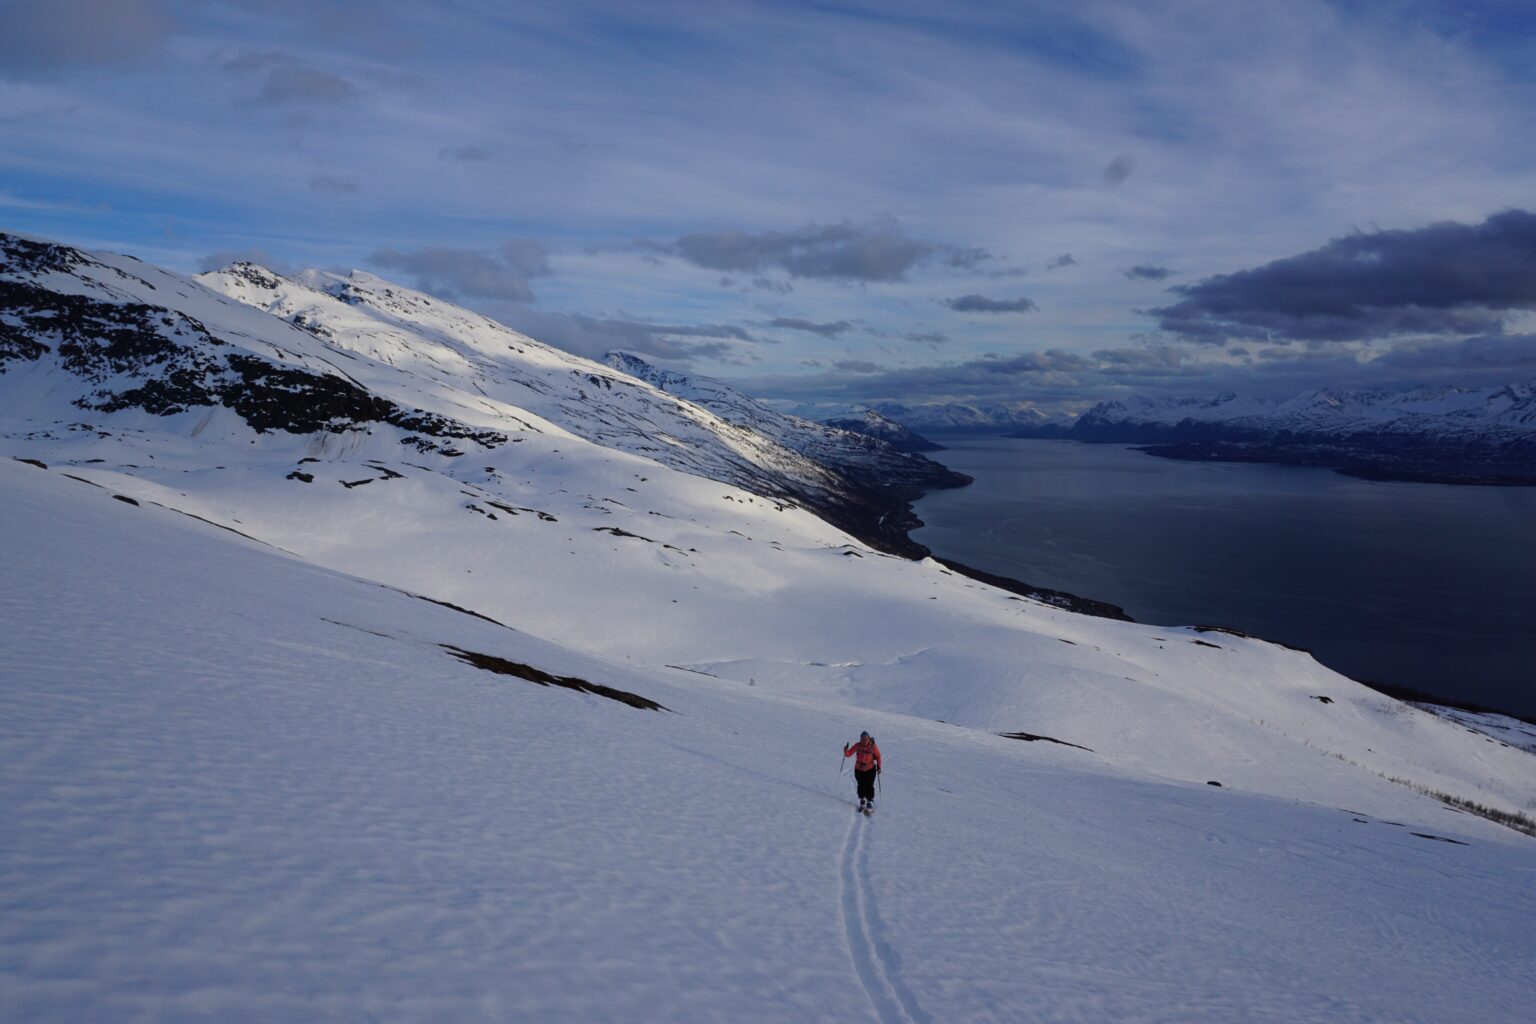 Ski touring up the upper basin of Storhaugen with the Lyngenfjord in the background